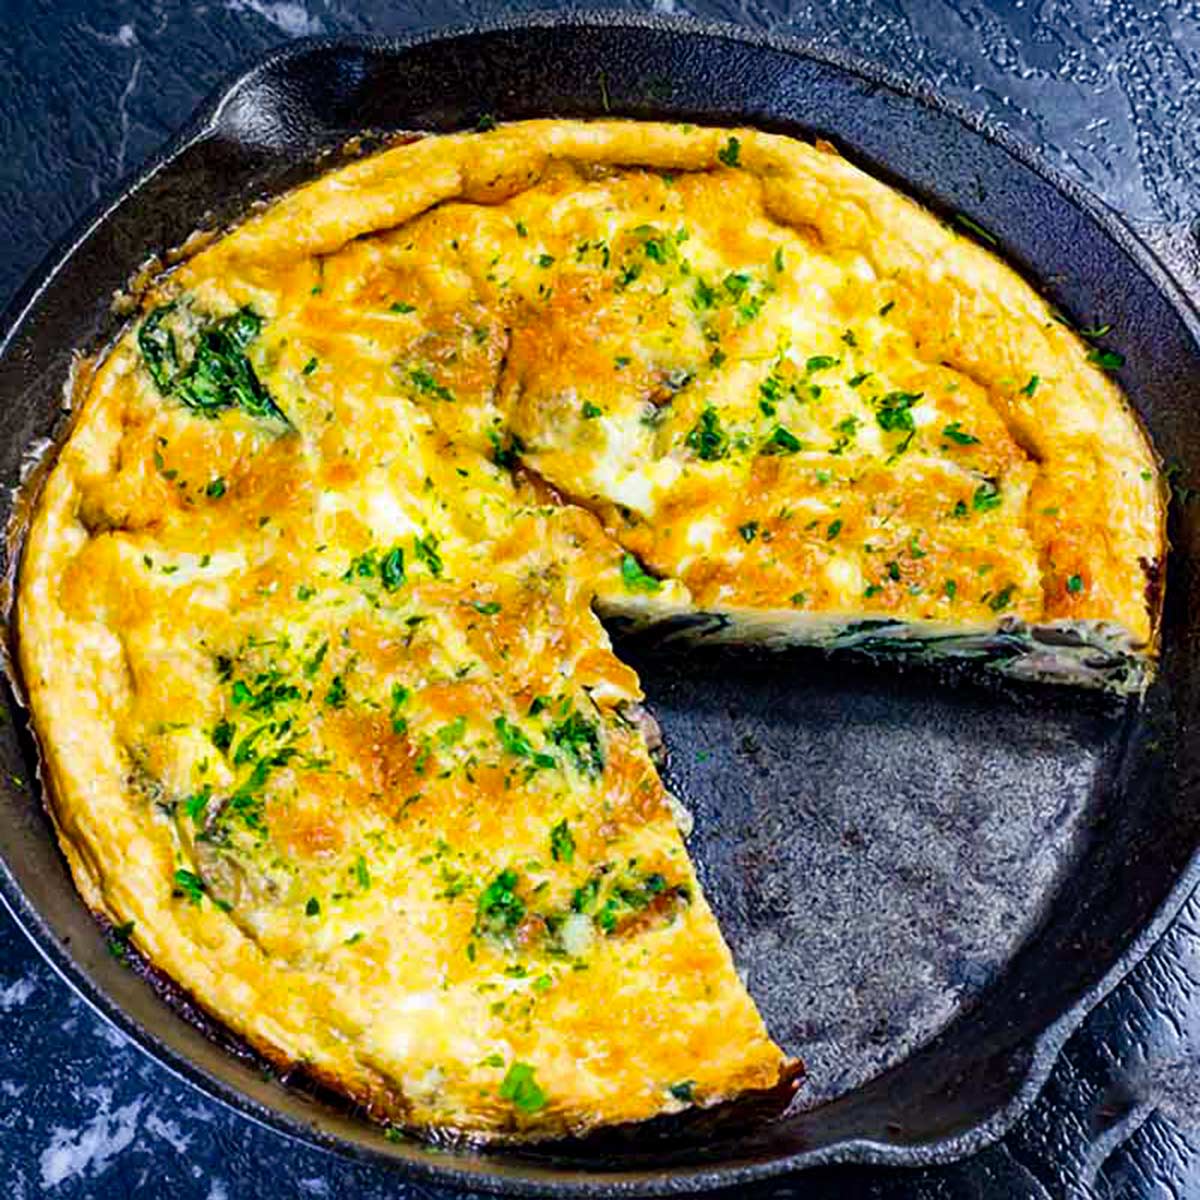 Keto frittata in a frying pan.